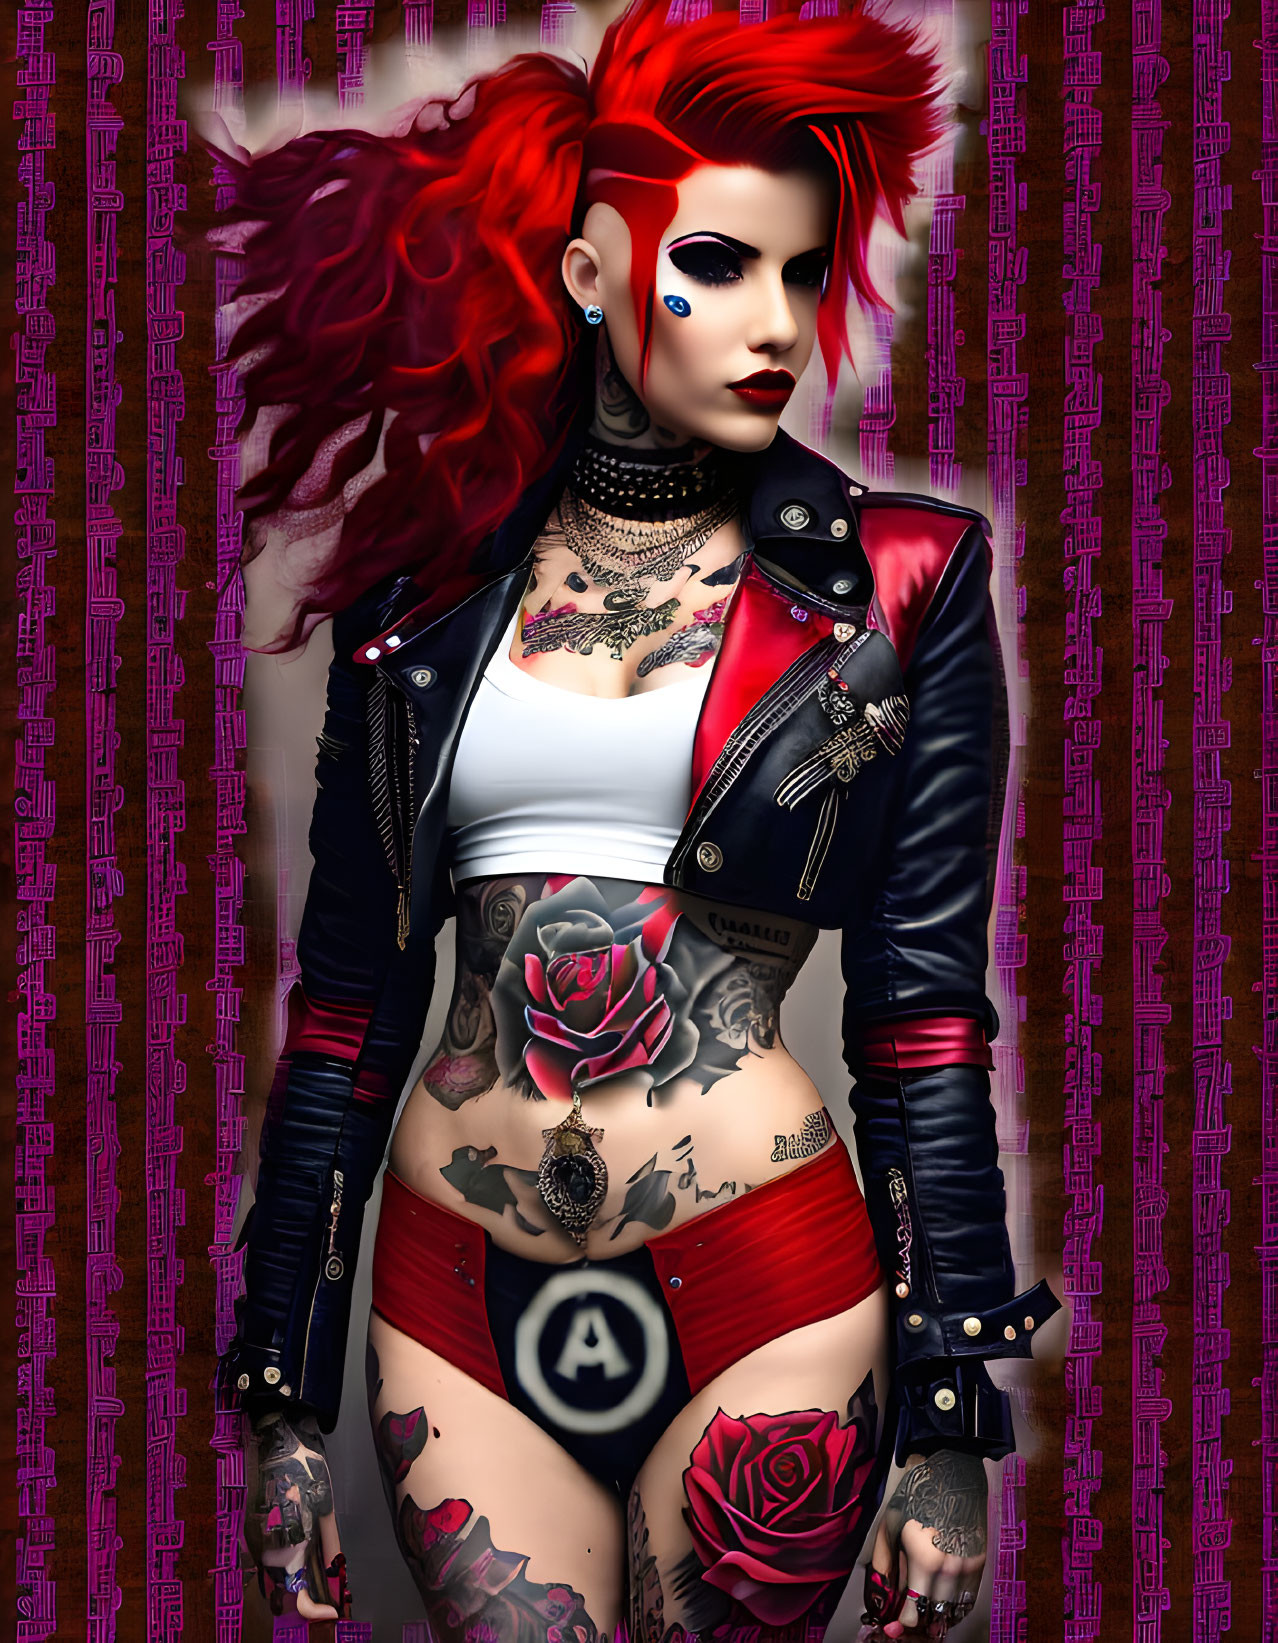 Punk Woman In Red